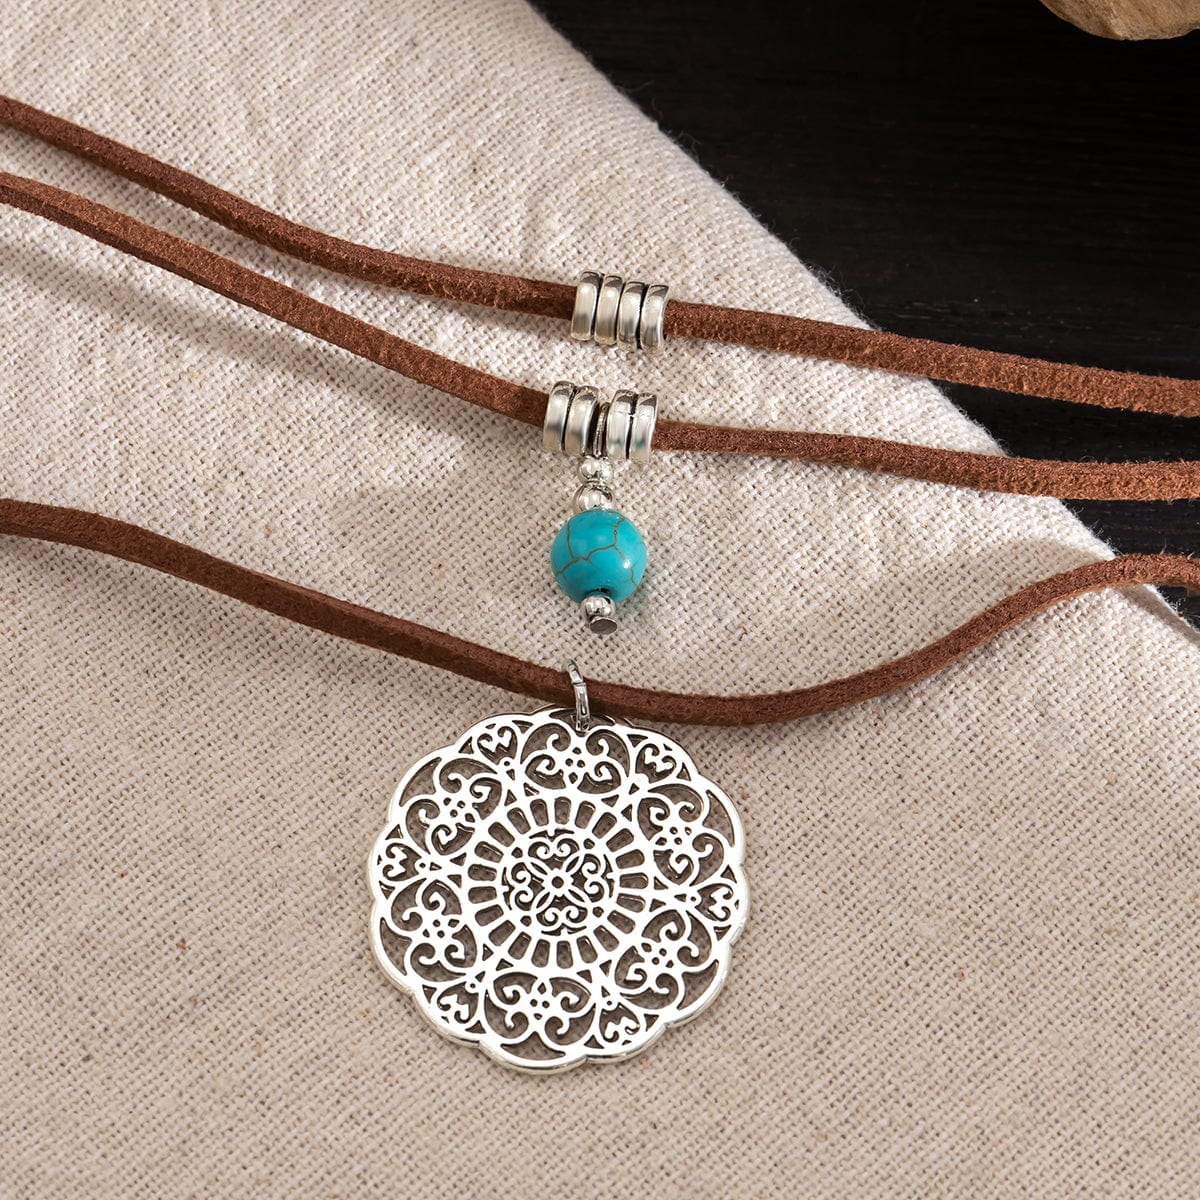 Chic Layered Carved Floral Round Disk Turquoise Pendant Velvet String Necklace - ArtGalleryZen